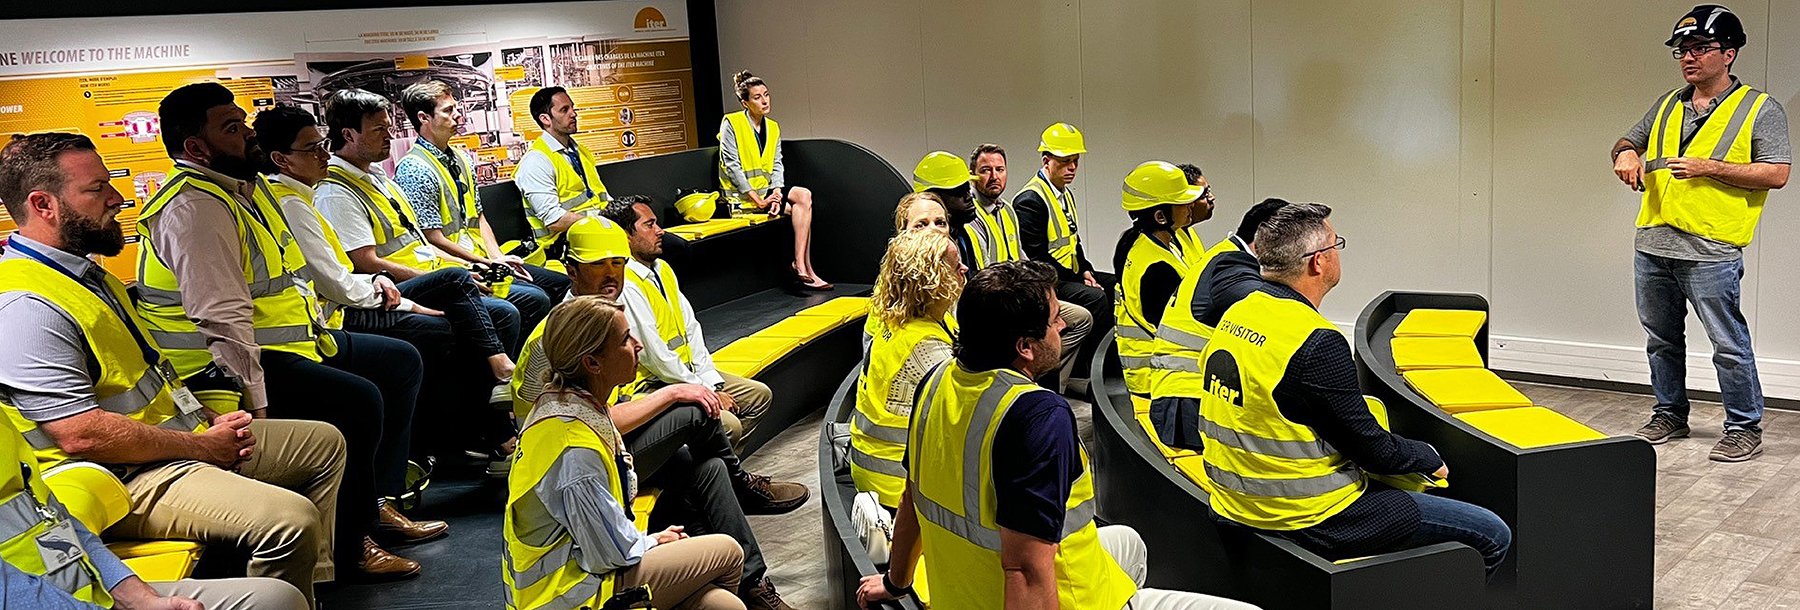 Section Image: Energy students in hard hats and vests 